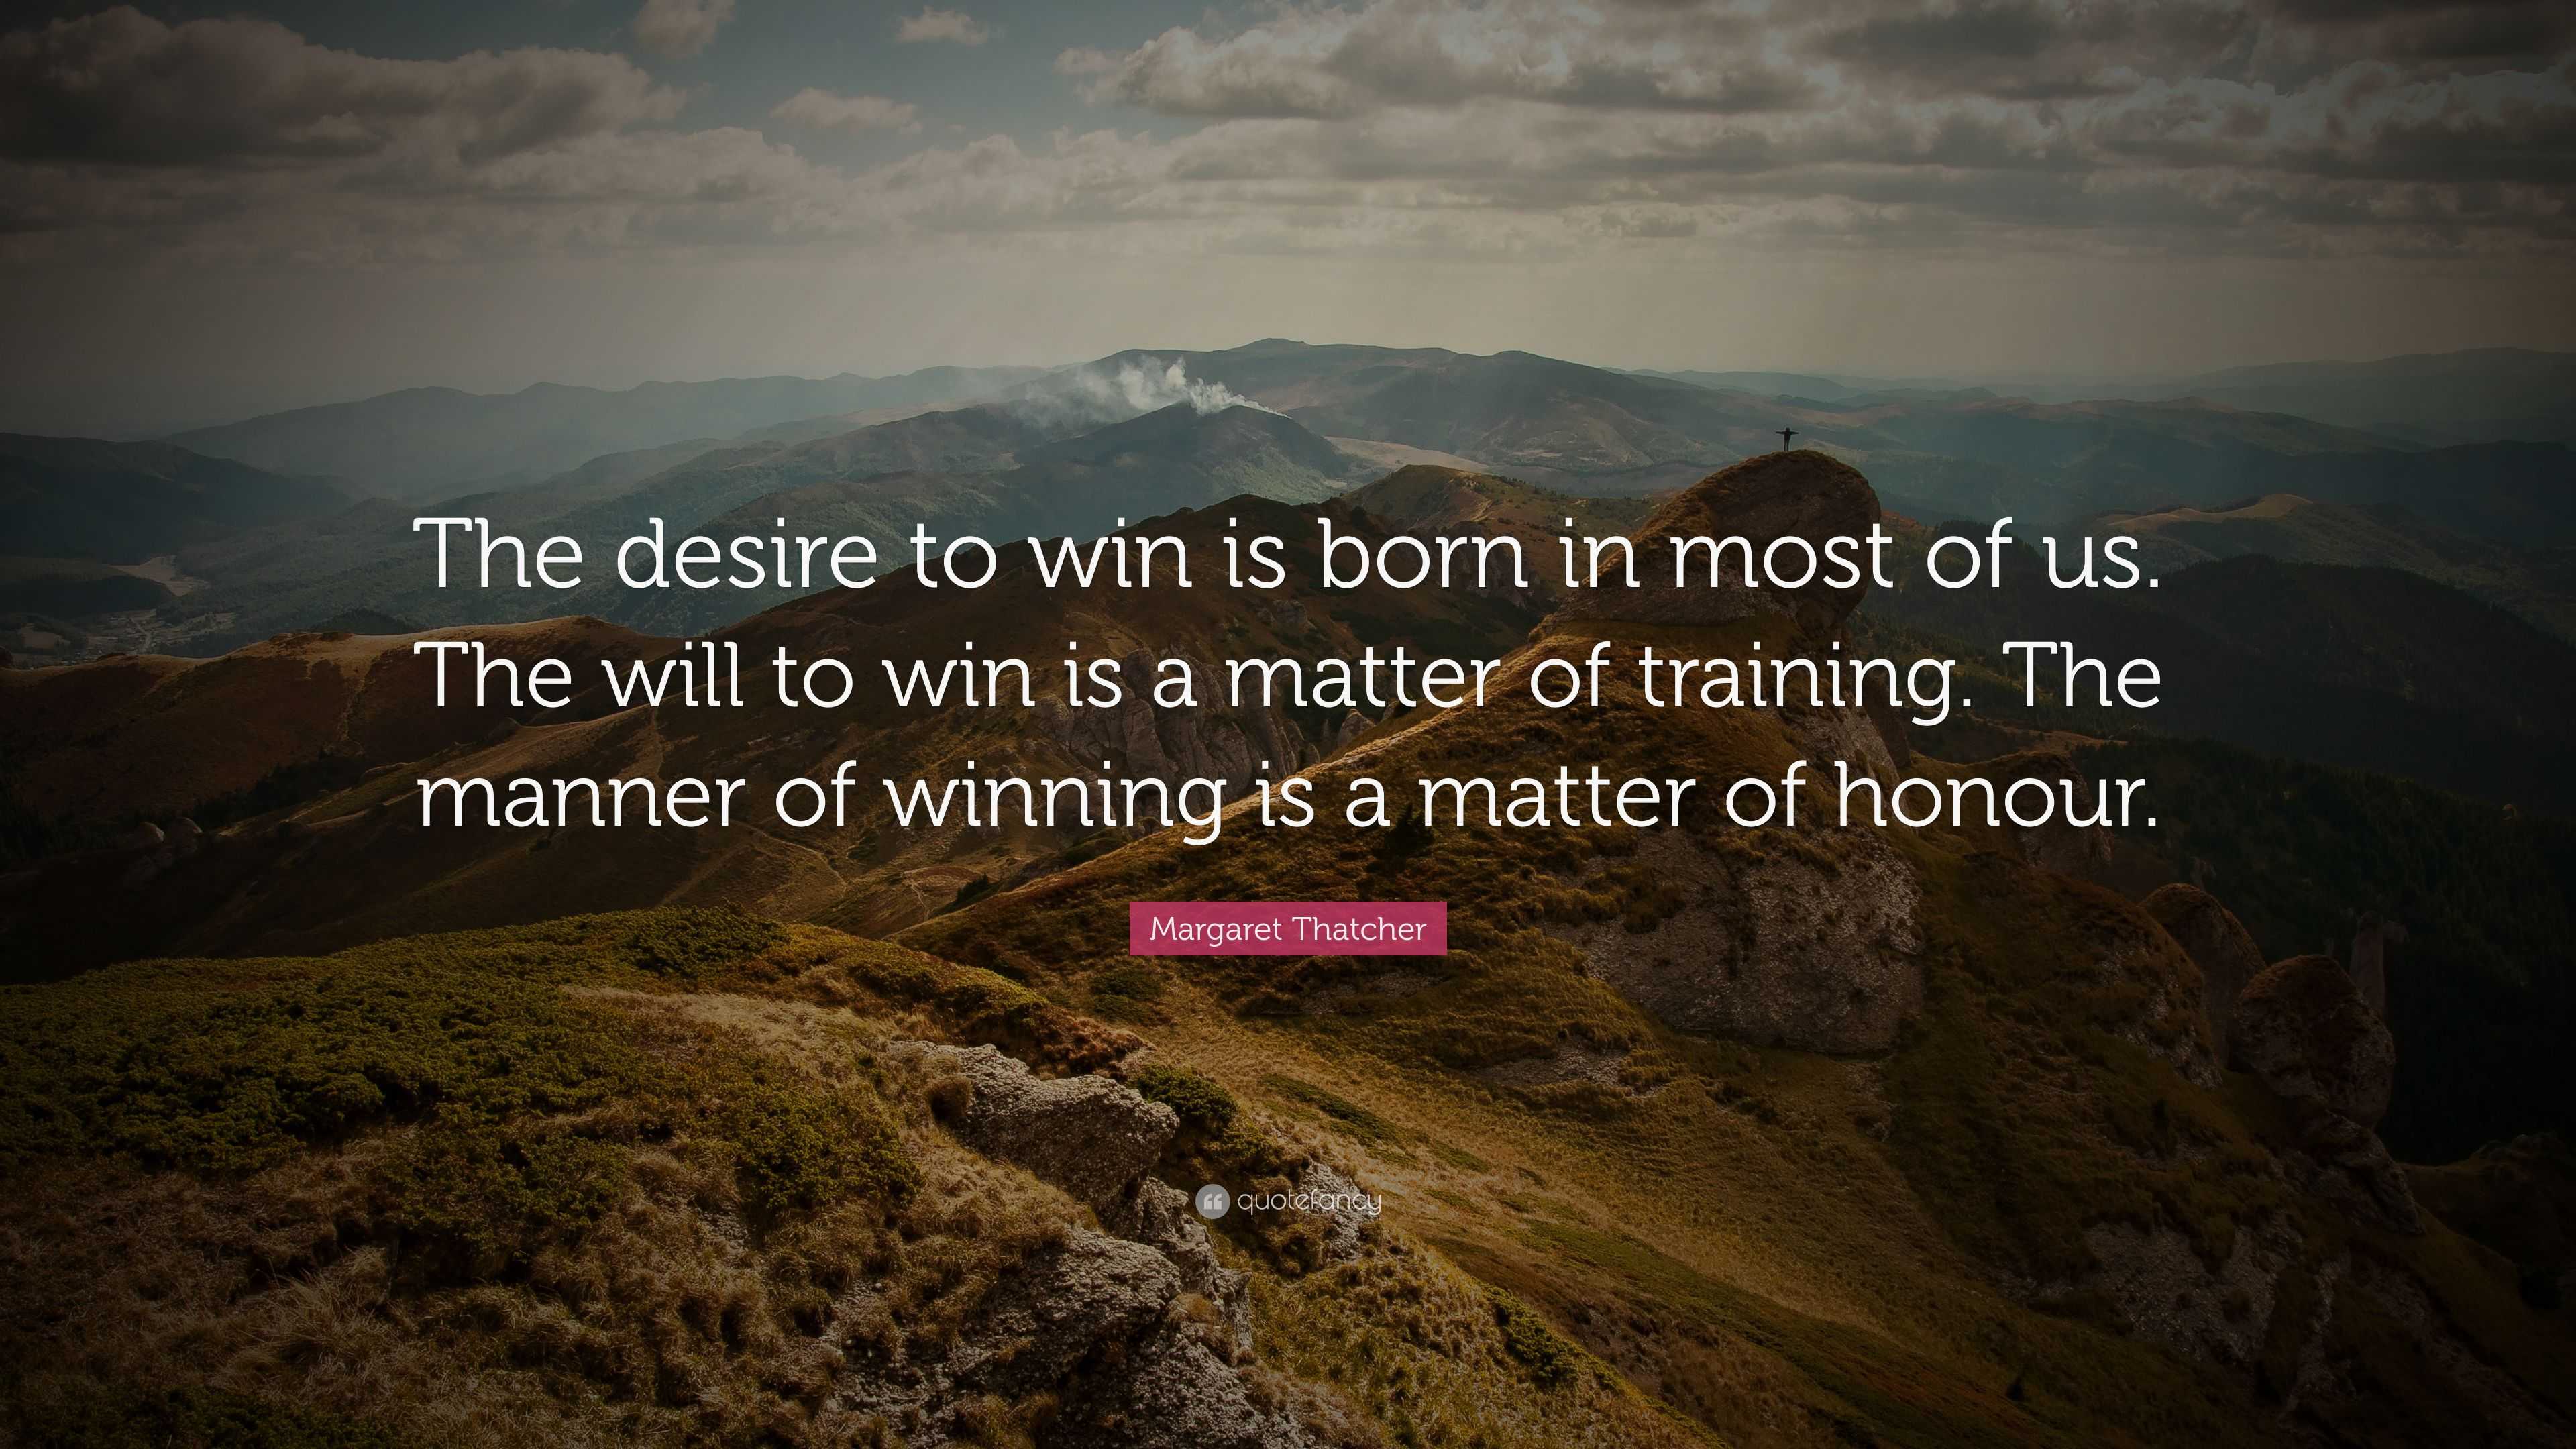 Margaret Thatcher Quote: “The desire to win is born in most of us. The ...